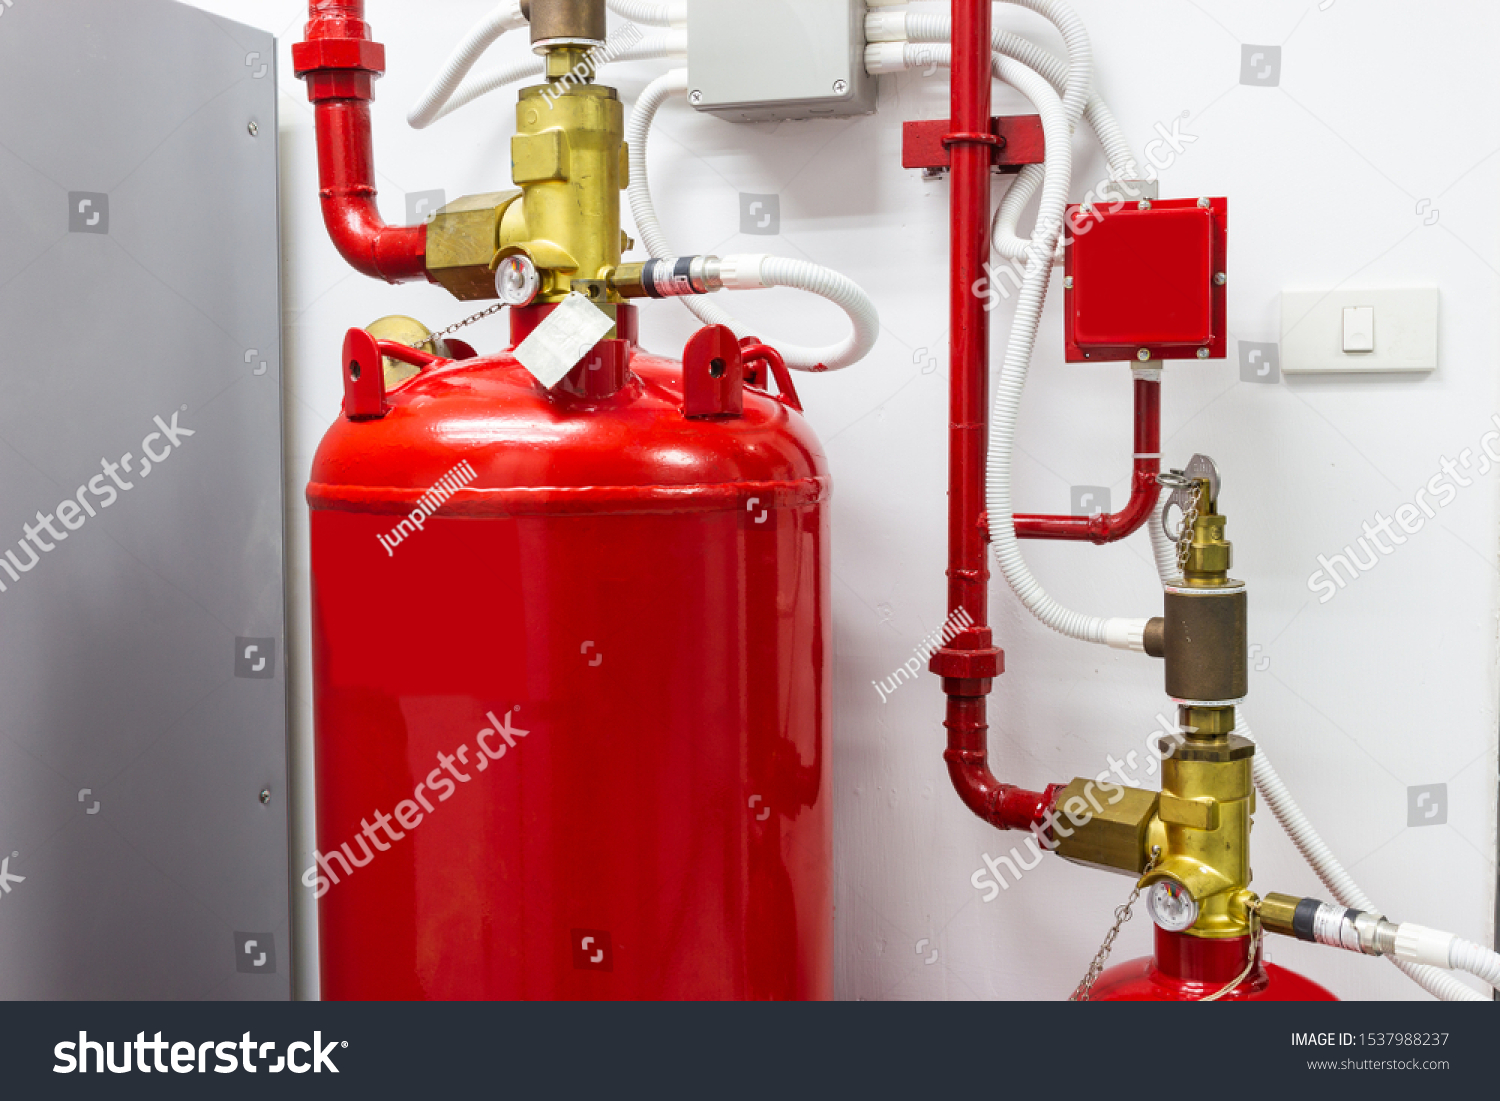 Fm0 Suppression Systems Fm0 Gas Flooding Stock Photo Edit Now